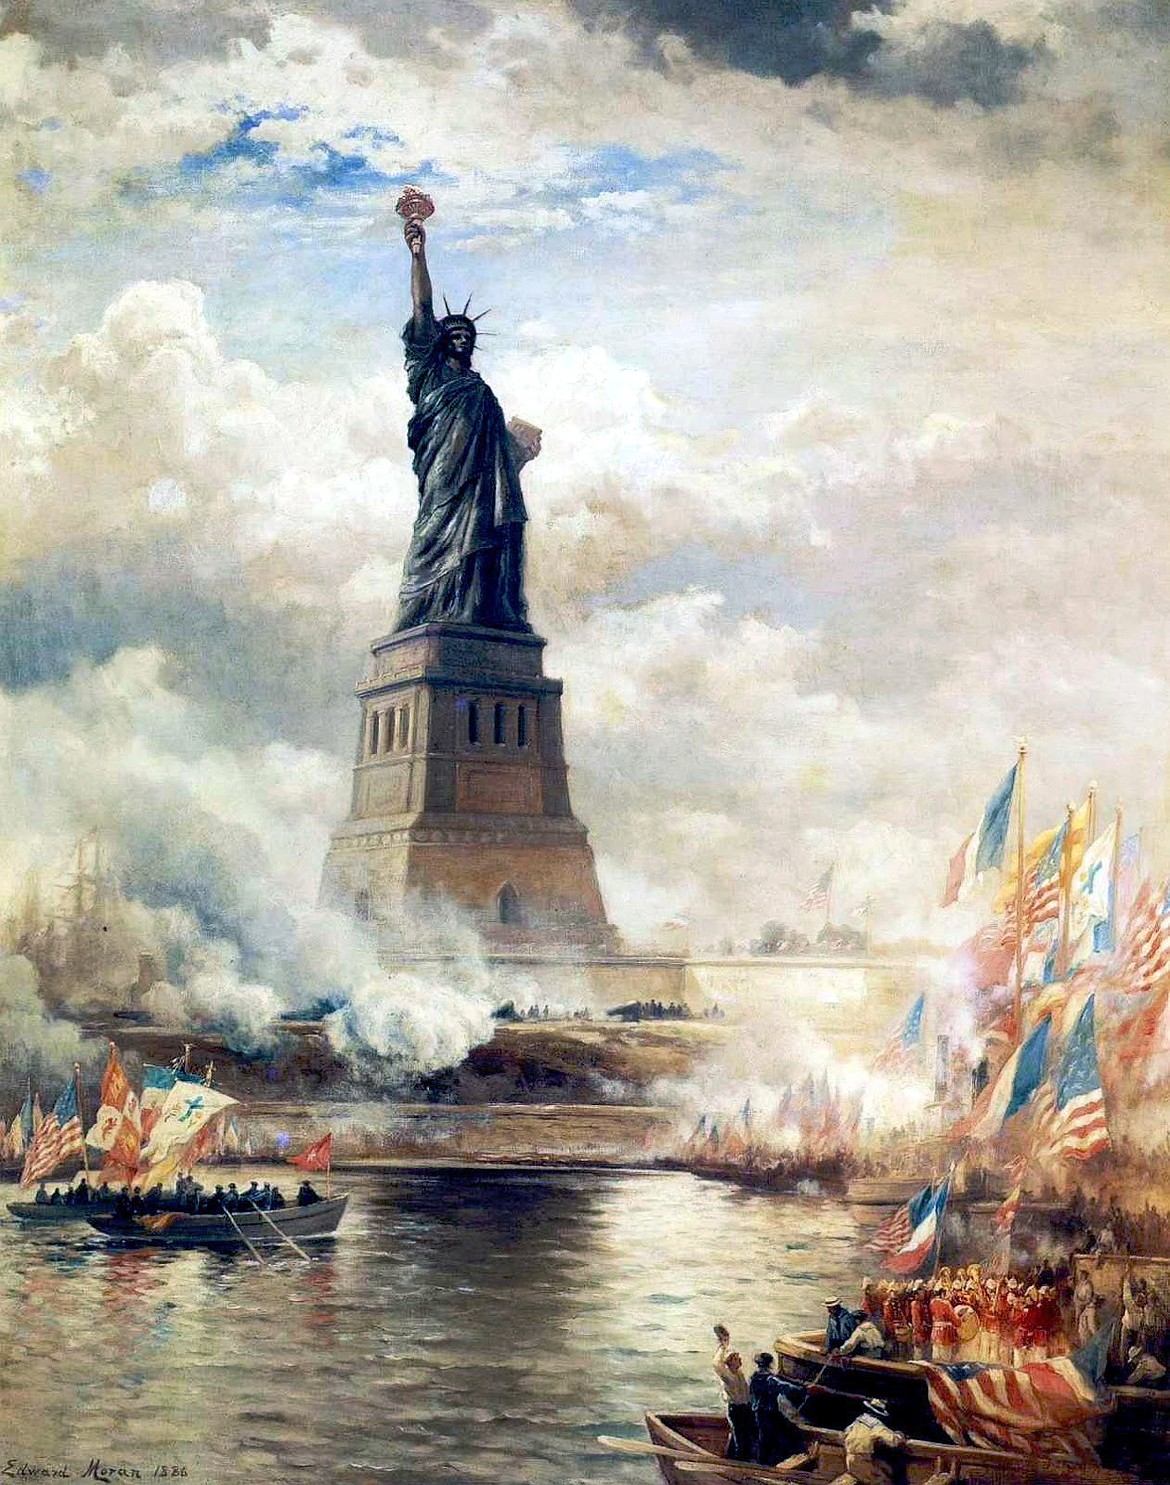 WIKIMEDIA COMMONS
Painting by Edward Moran of the unveiling of Gustave Eiffel’s Statue of Liberty in New York Harbor on Oct. 28, 1886.